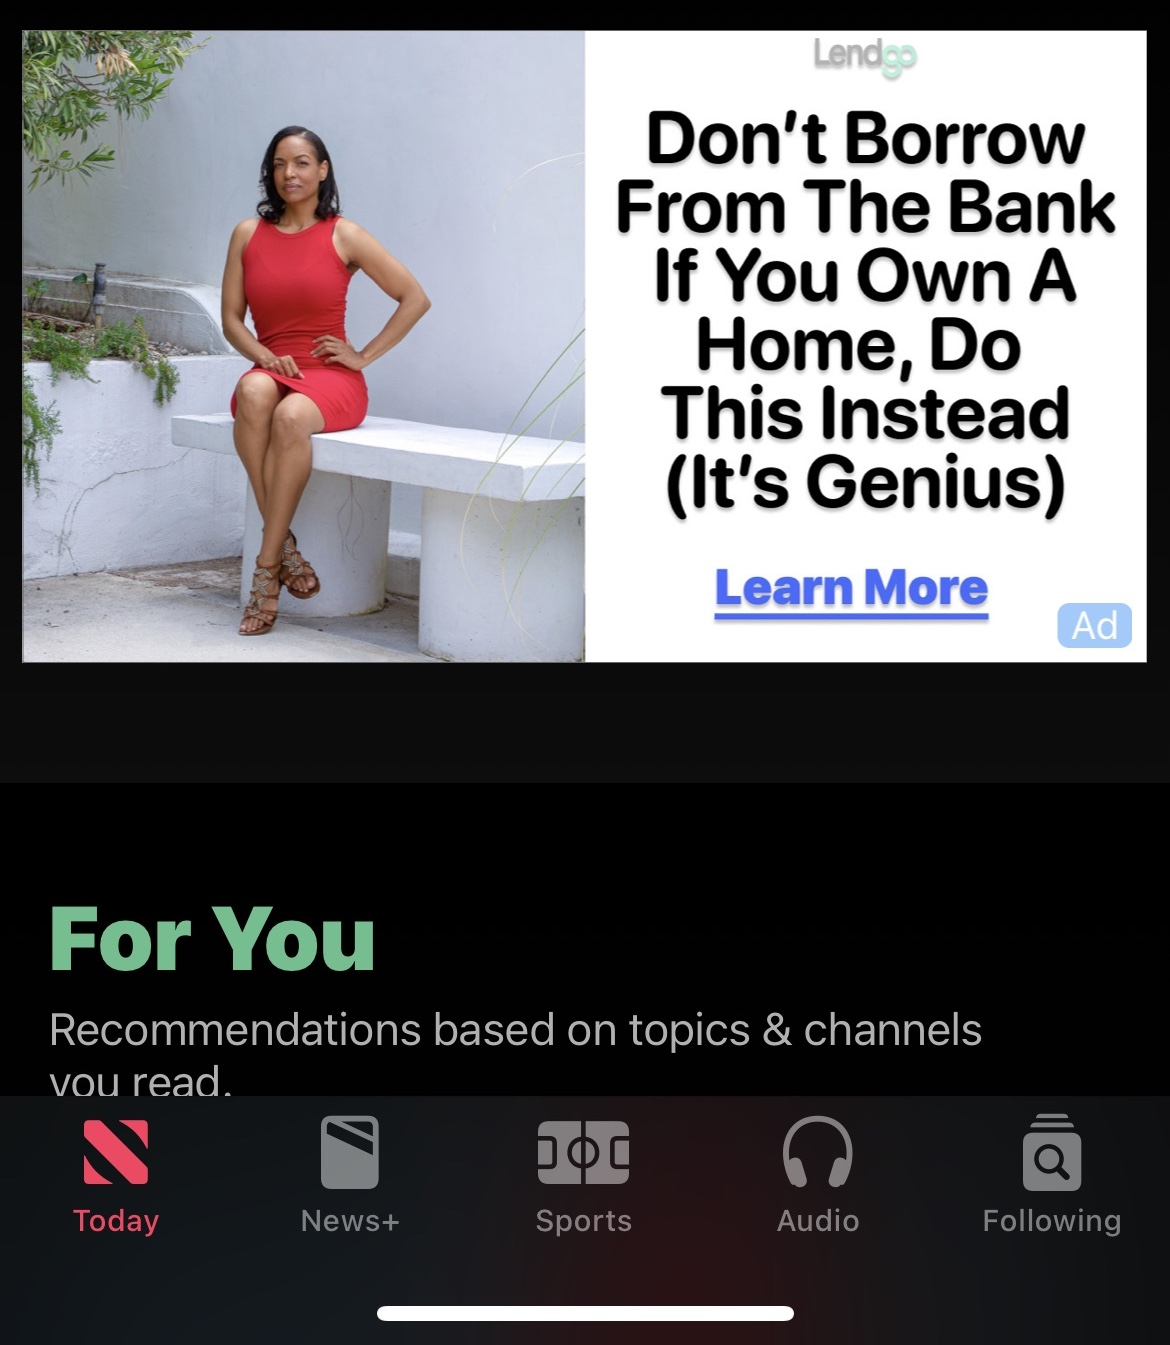 an ad for an obvious scam.